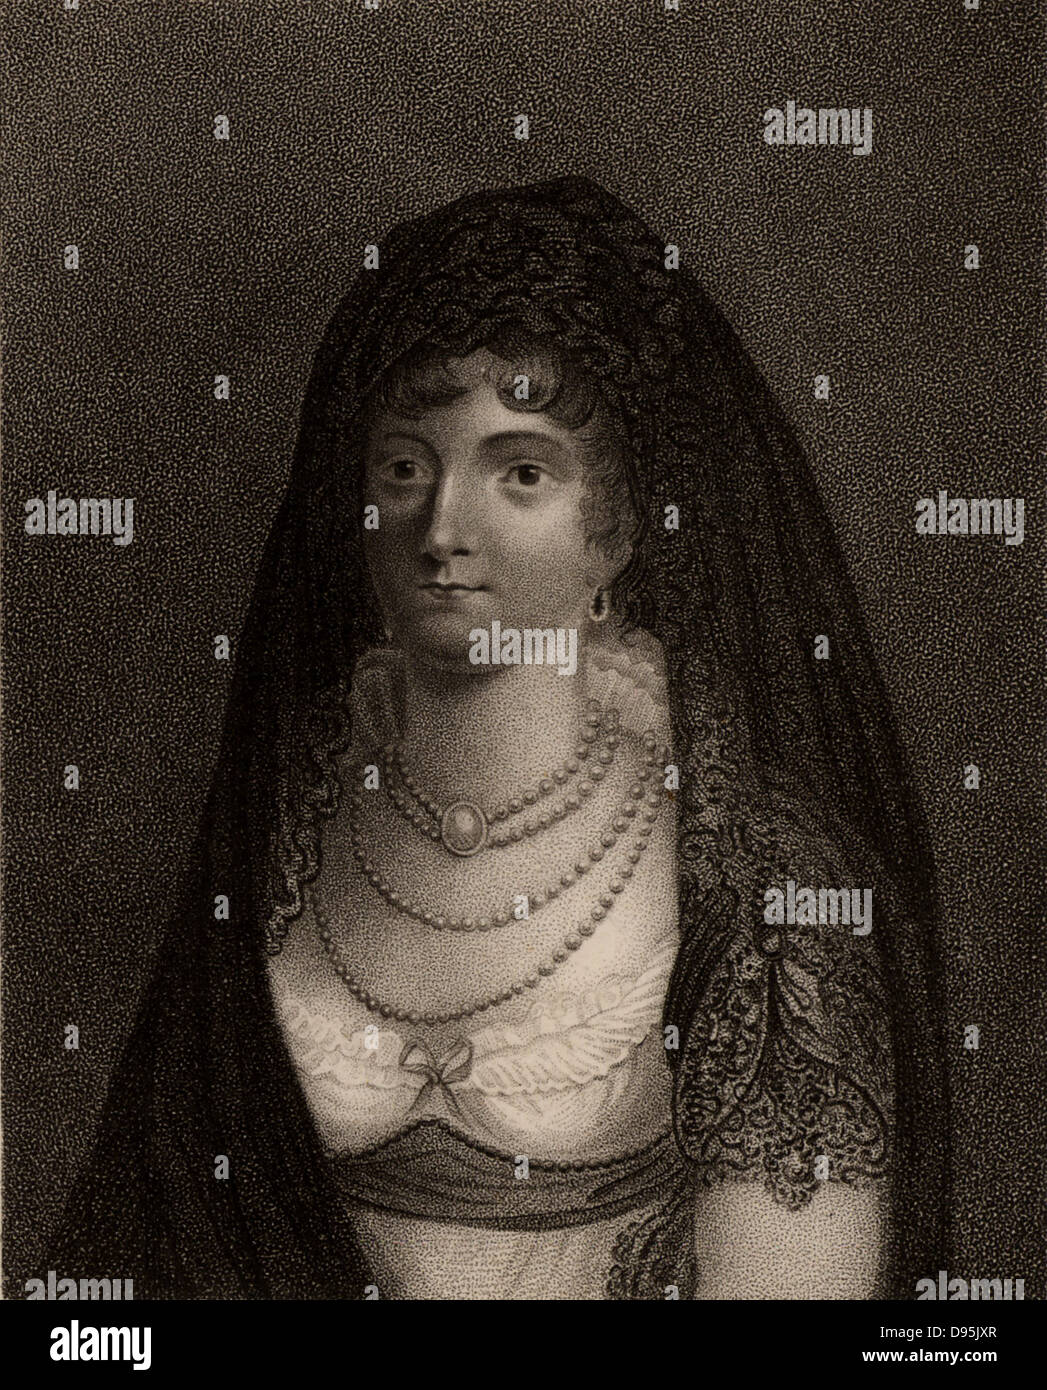 Marie Chamand, Comtesse de Lavalette (1781-1855), wife of Comte de Lavalette,  French politician and Napoleonic general, and niece of Josephine Beauharnais.  In 1815 she saved husband's life by changing clothes with him and enabling him to escape from prison shortly before due to be executed under the second Bourbon restoration.  Stipple engraving from 'History of the Wars Occasioned by the French Revolution...' by CH Gifford (London, 1817). Stock Photo